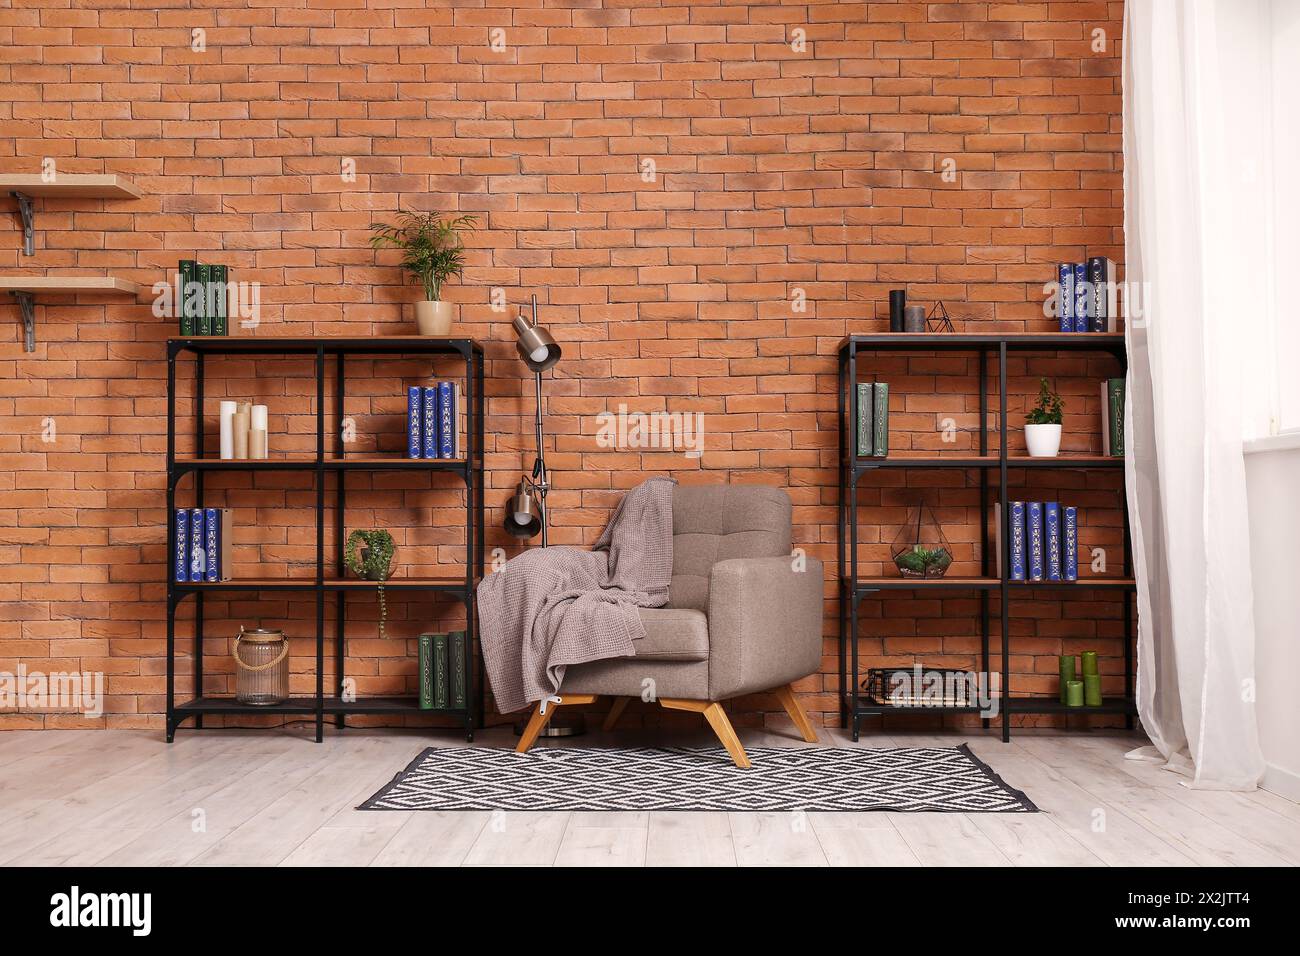 Shelving units, grey armchair and lamp near brown brick wall in living room Stock Photo